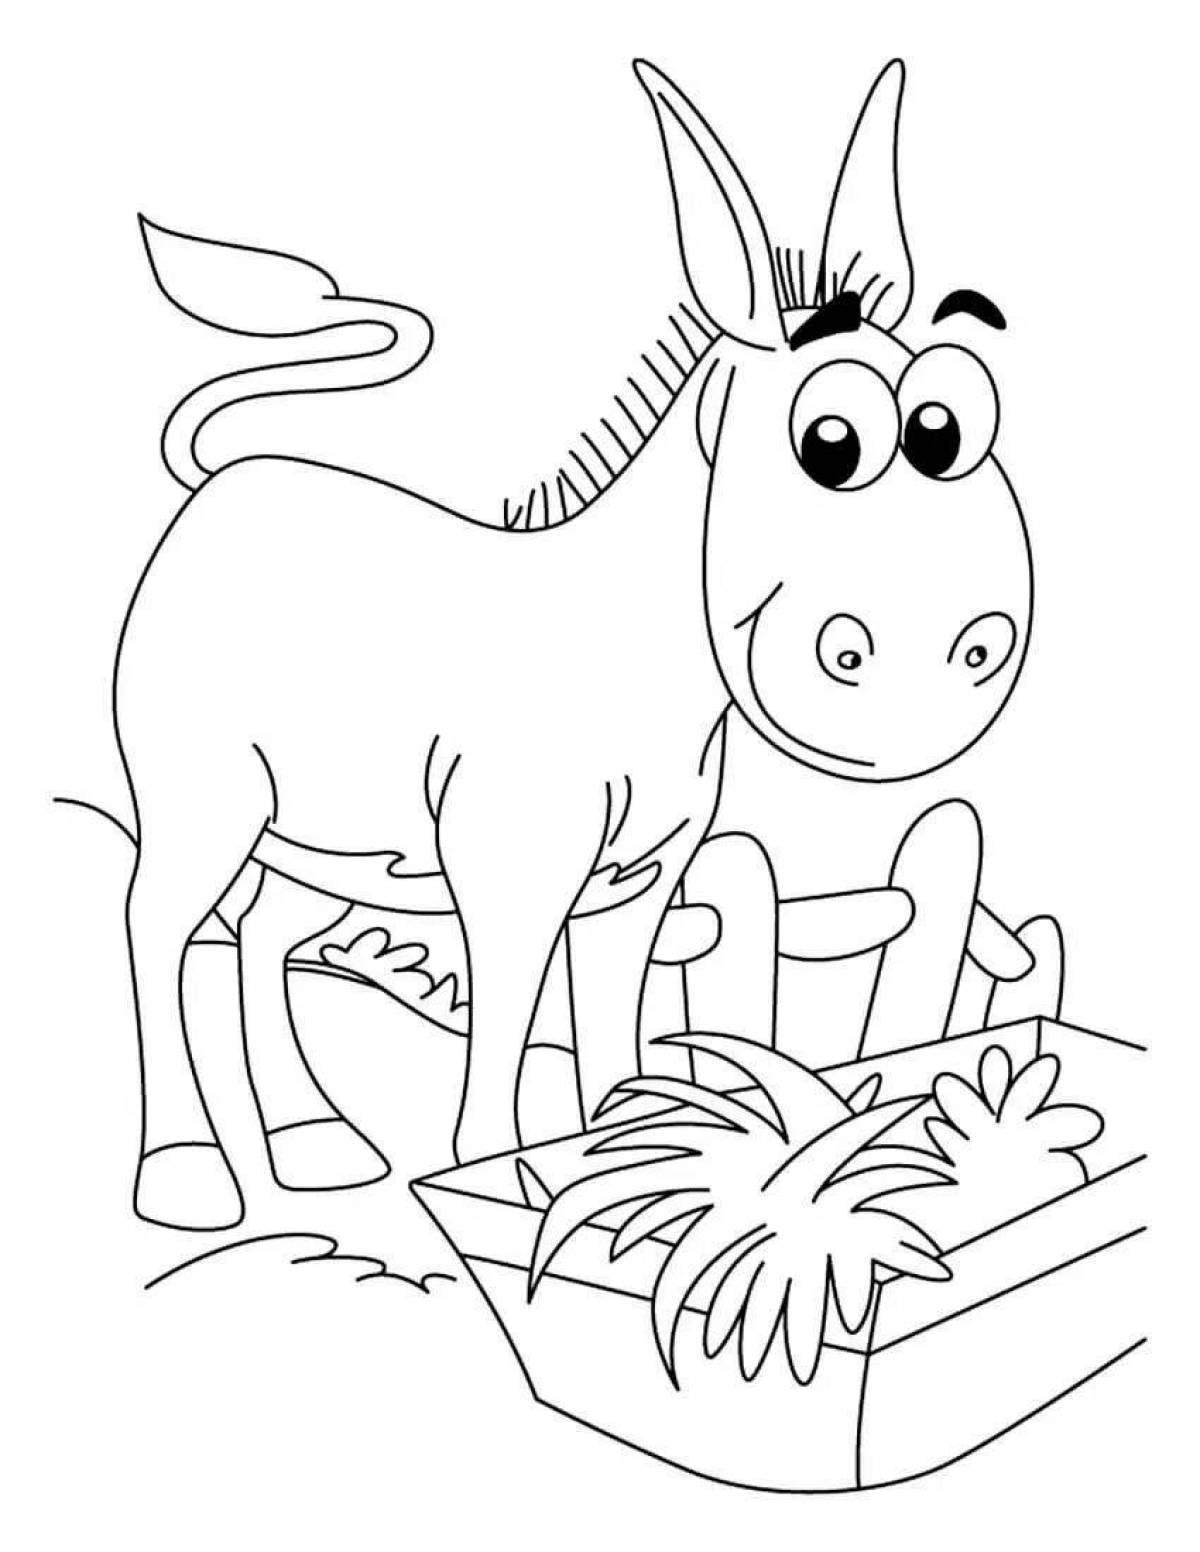 Fancy coloring donkey for kids